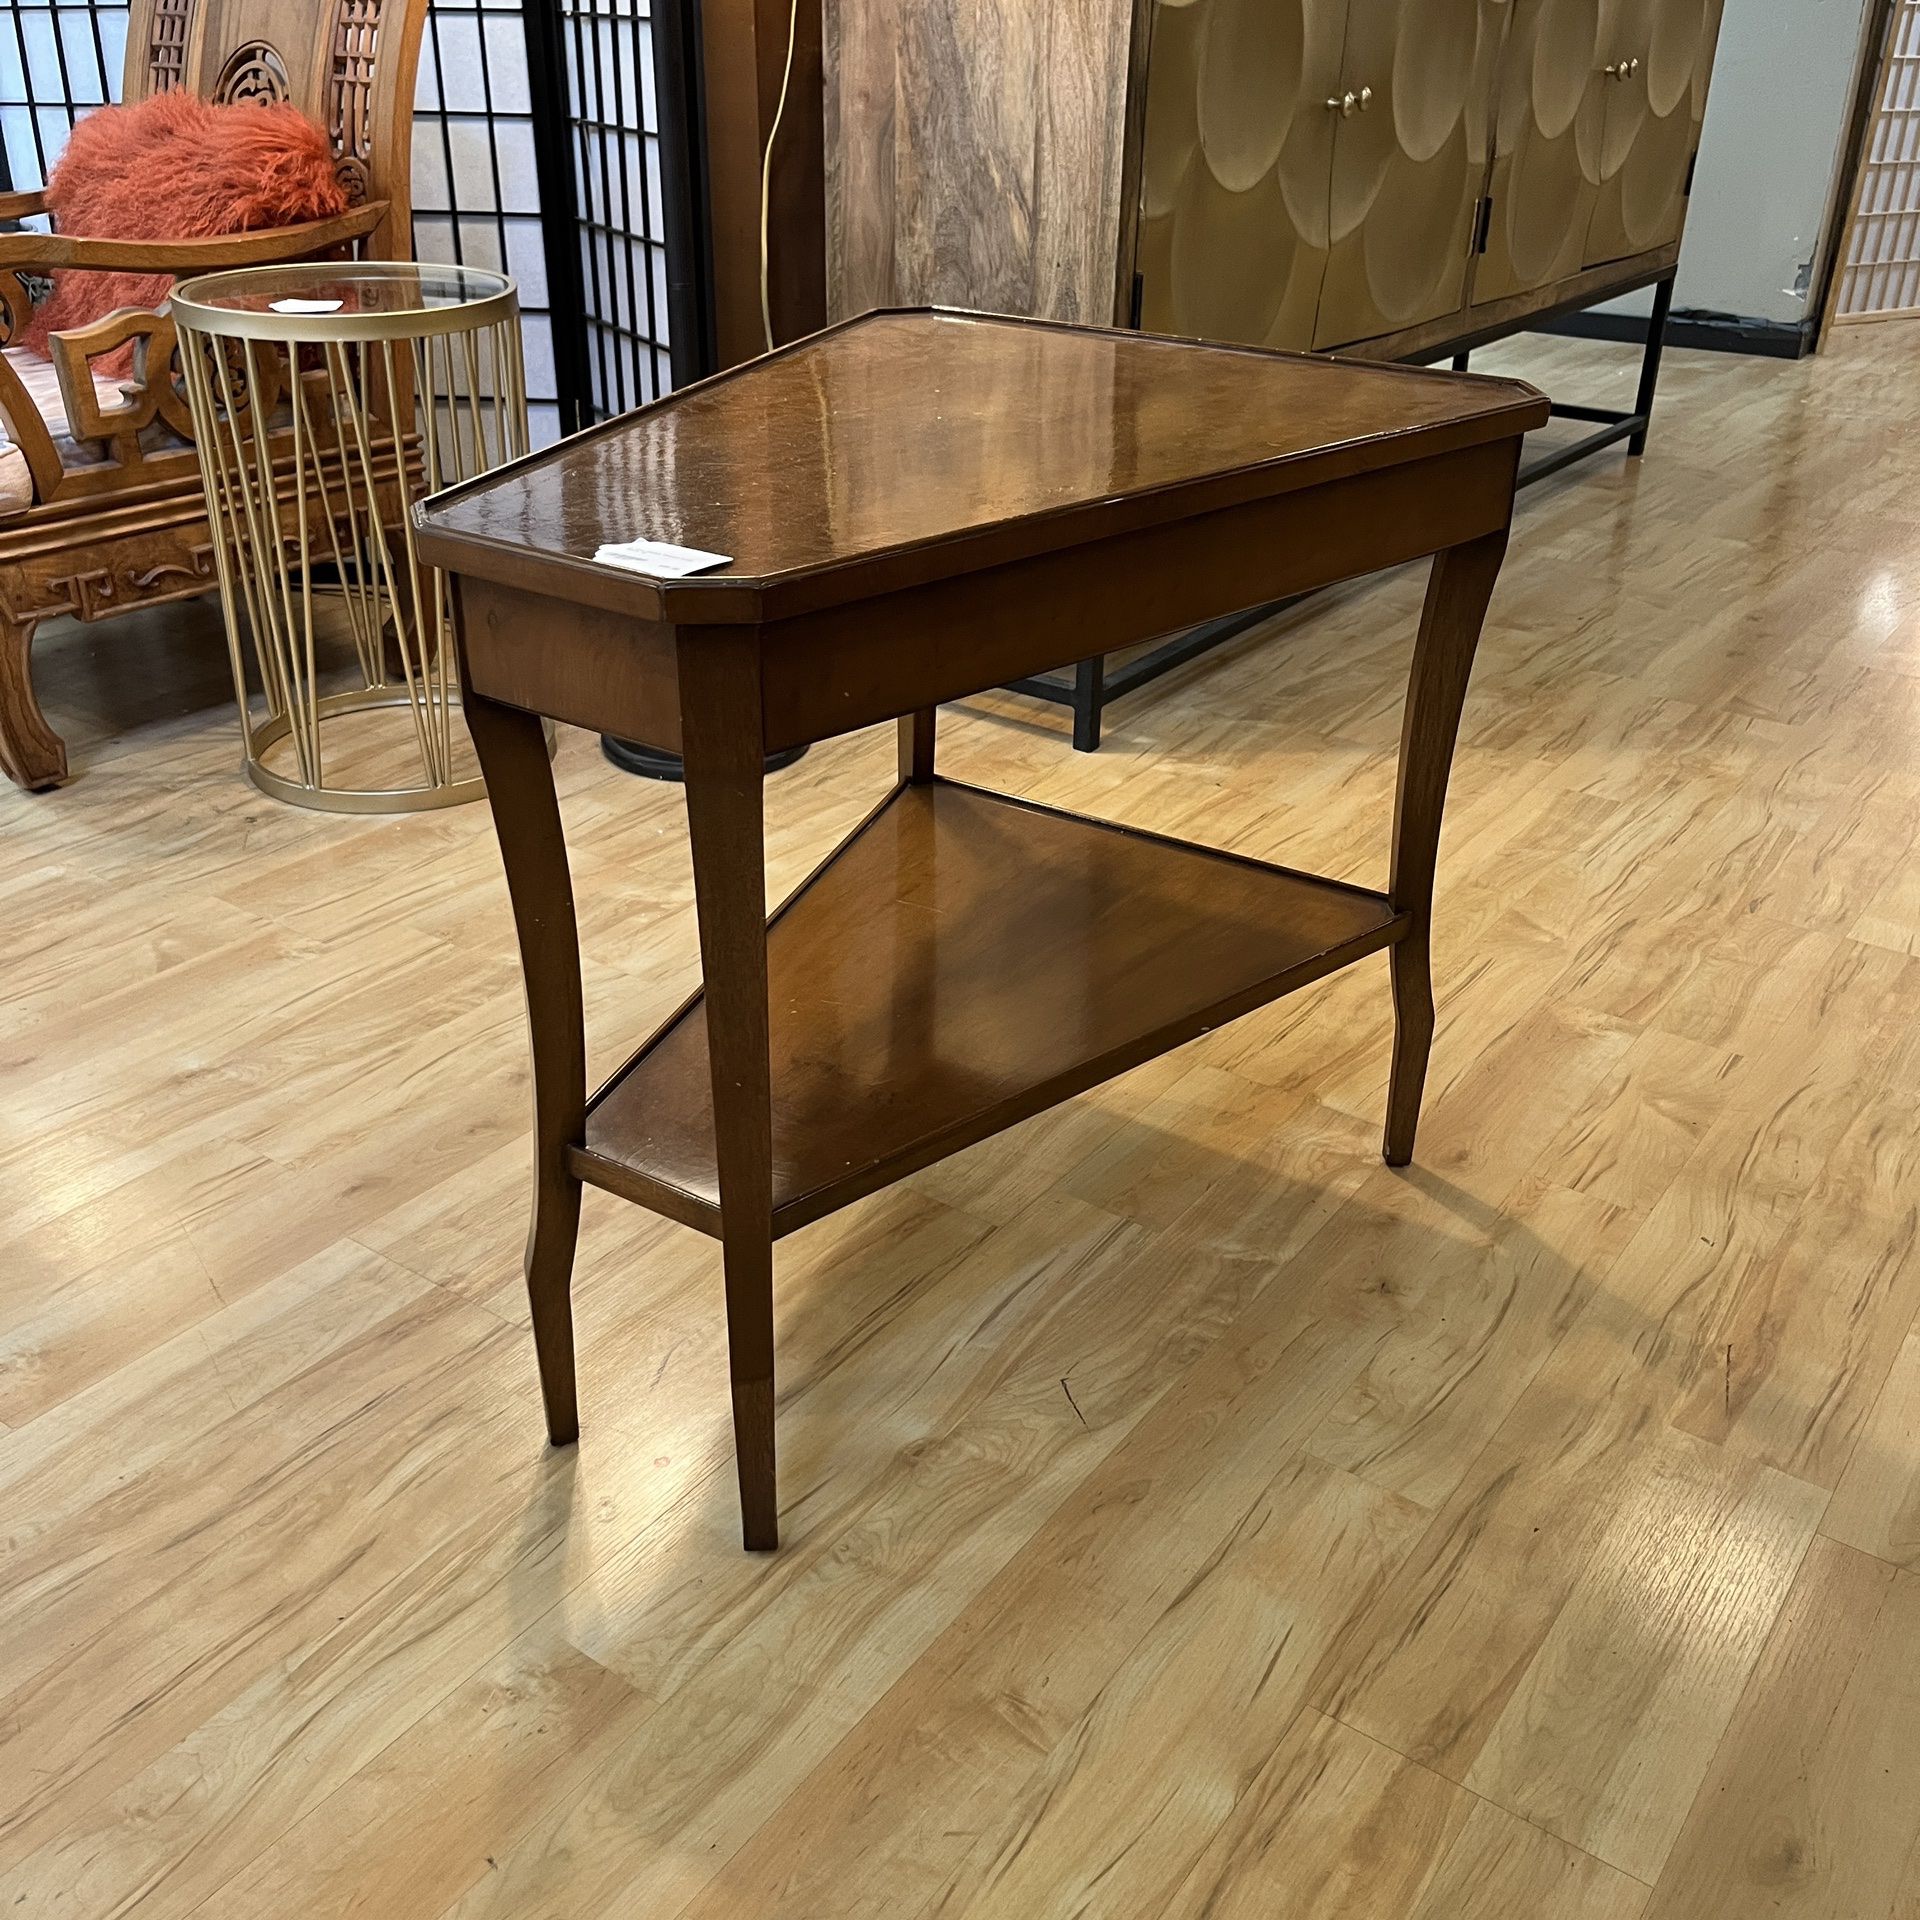 2 Tier Wedge Shaped Side Table